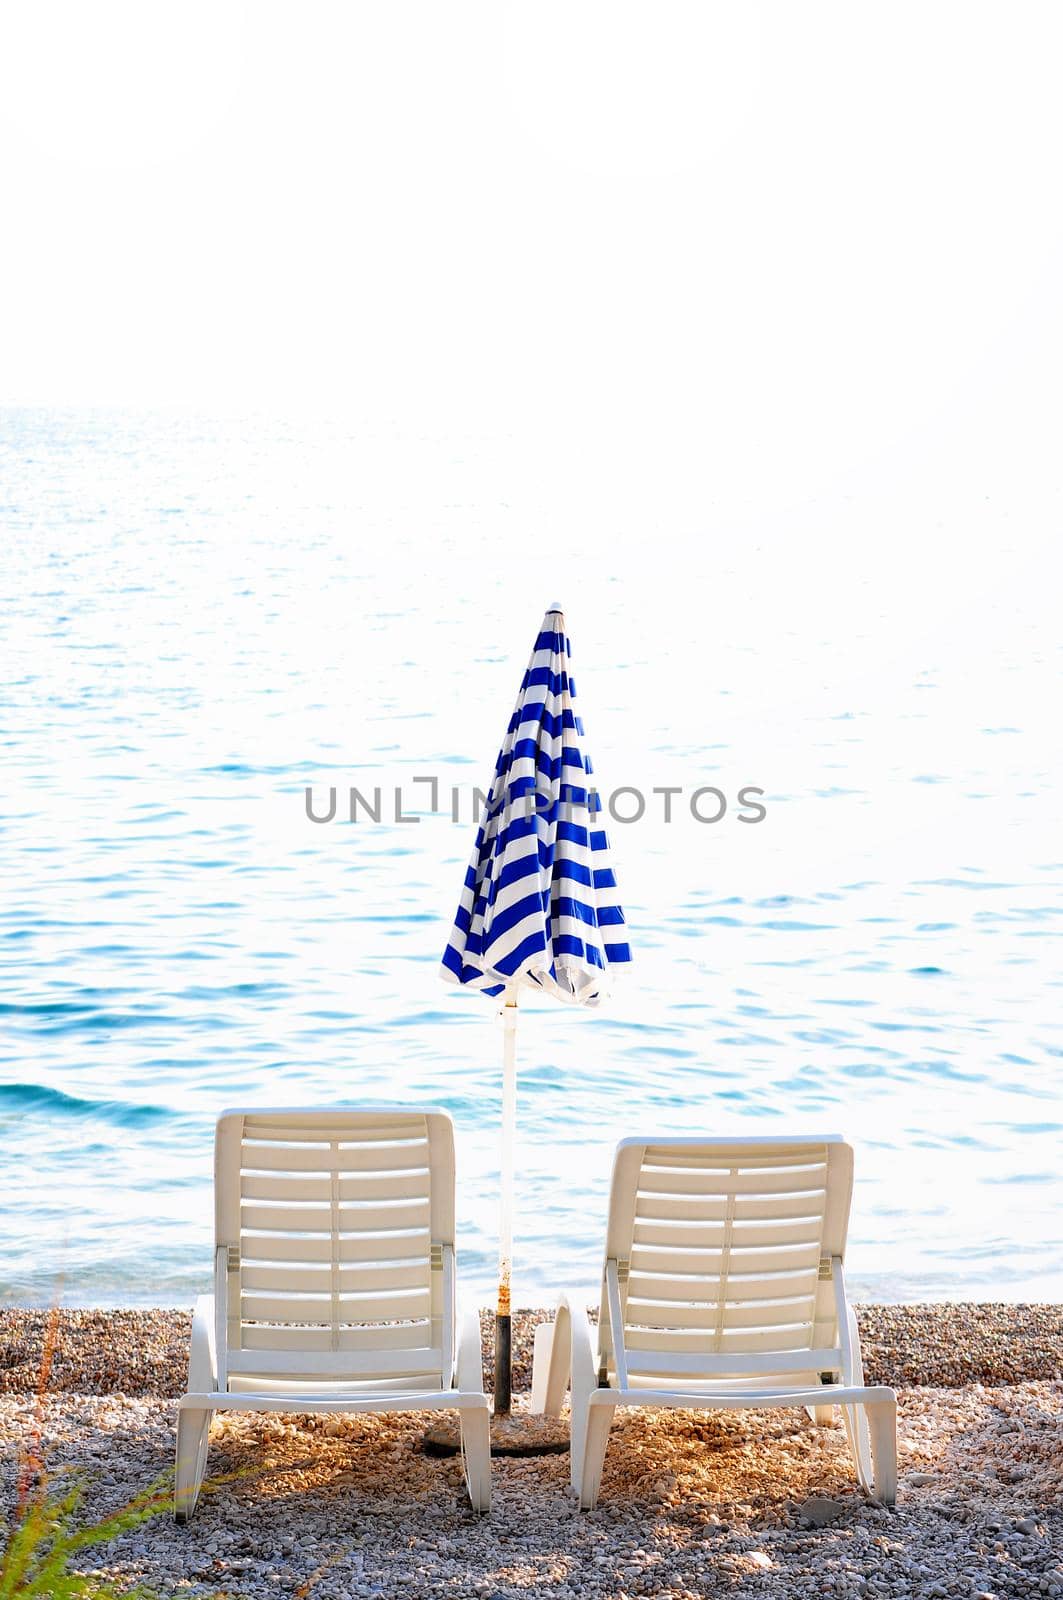 empty chairs on beach with umbrella by dotshock